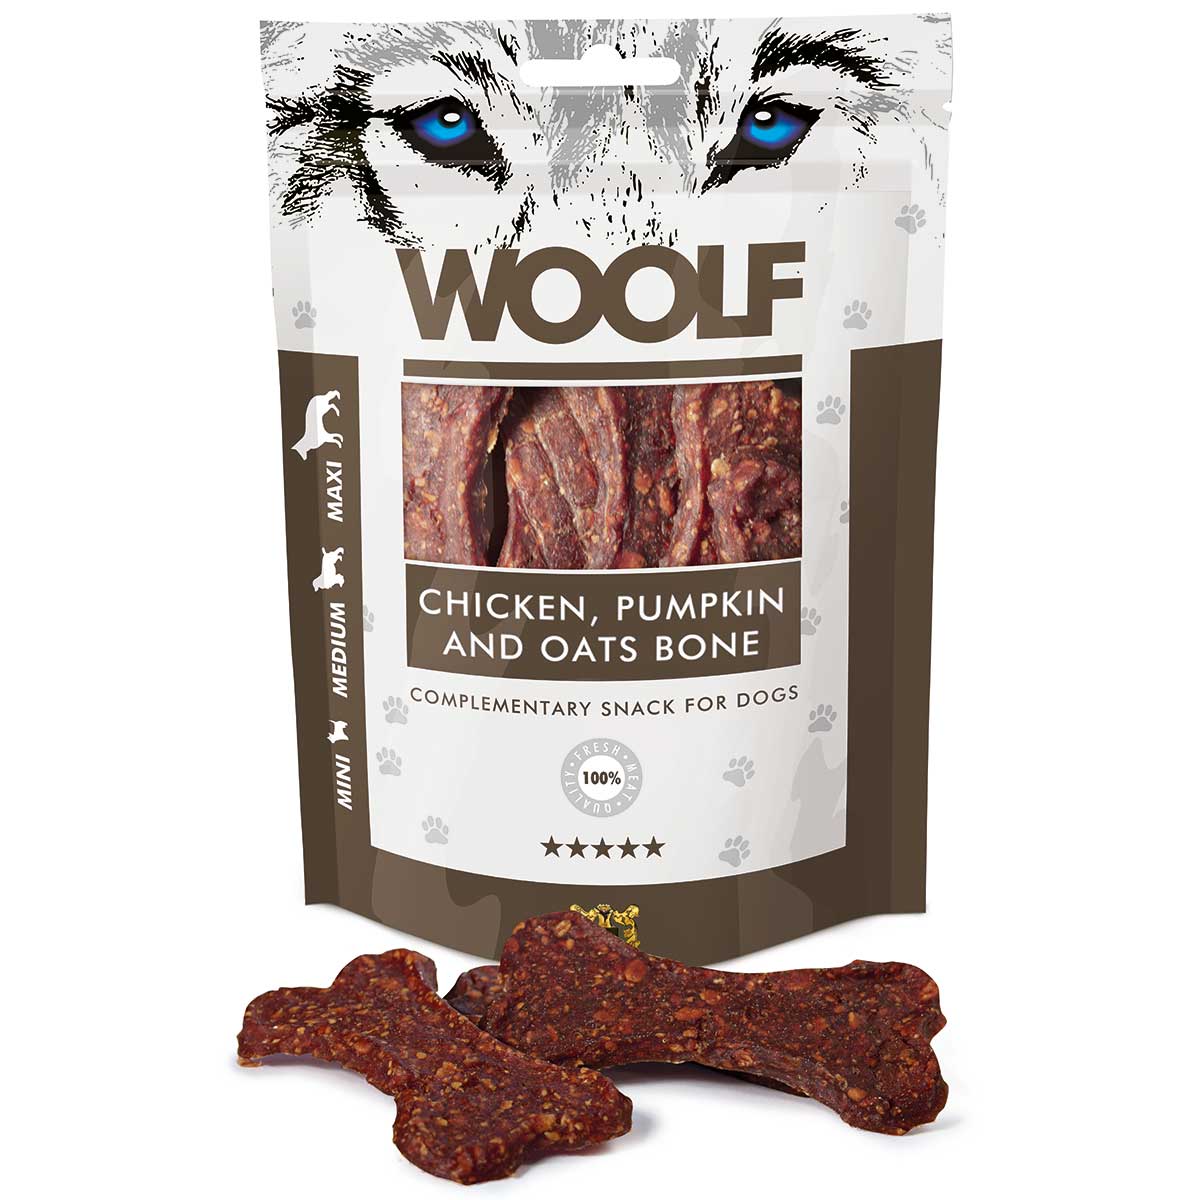 Woolf Dog treats large bones with chicken, pumpkin and oats